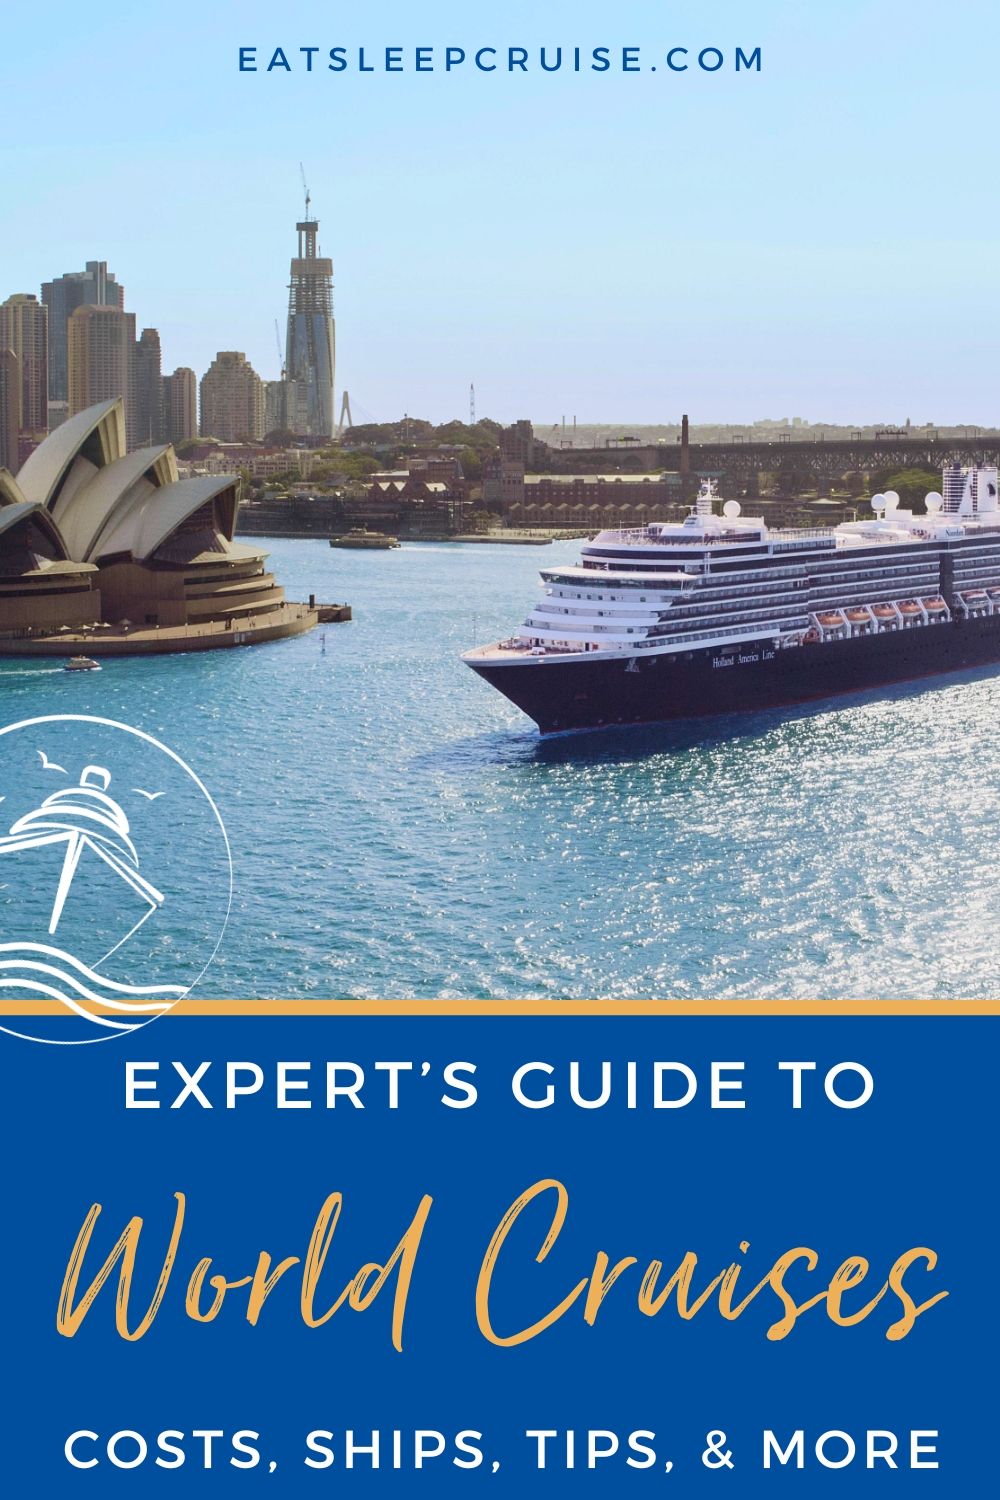 The Expert's Guide to World Cruises